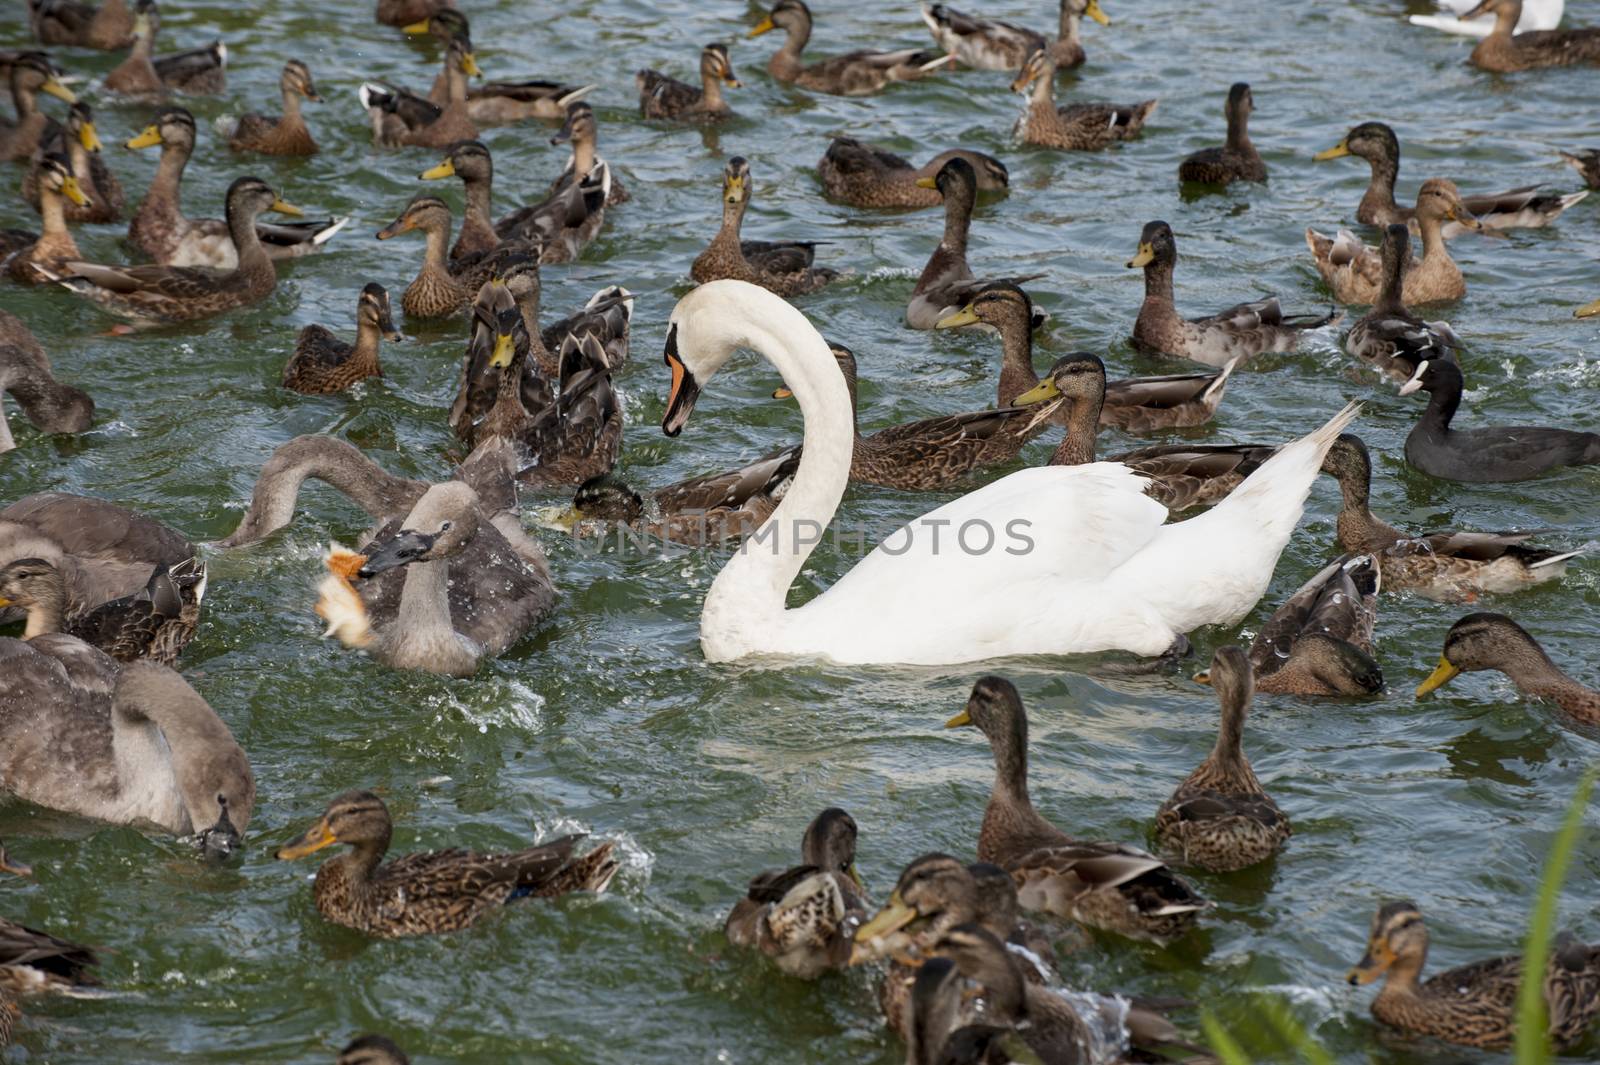 Waterfowl ducks and a white swan float in a pond